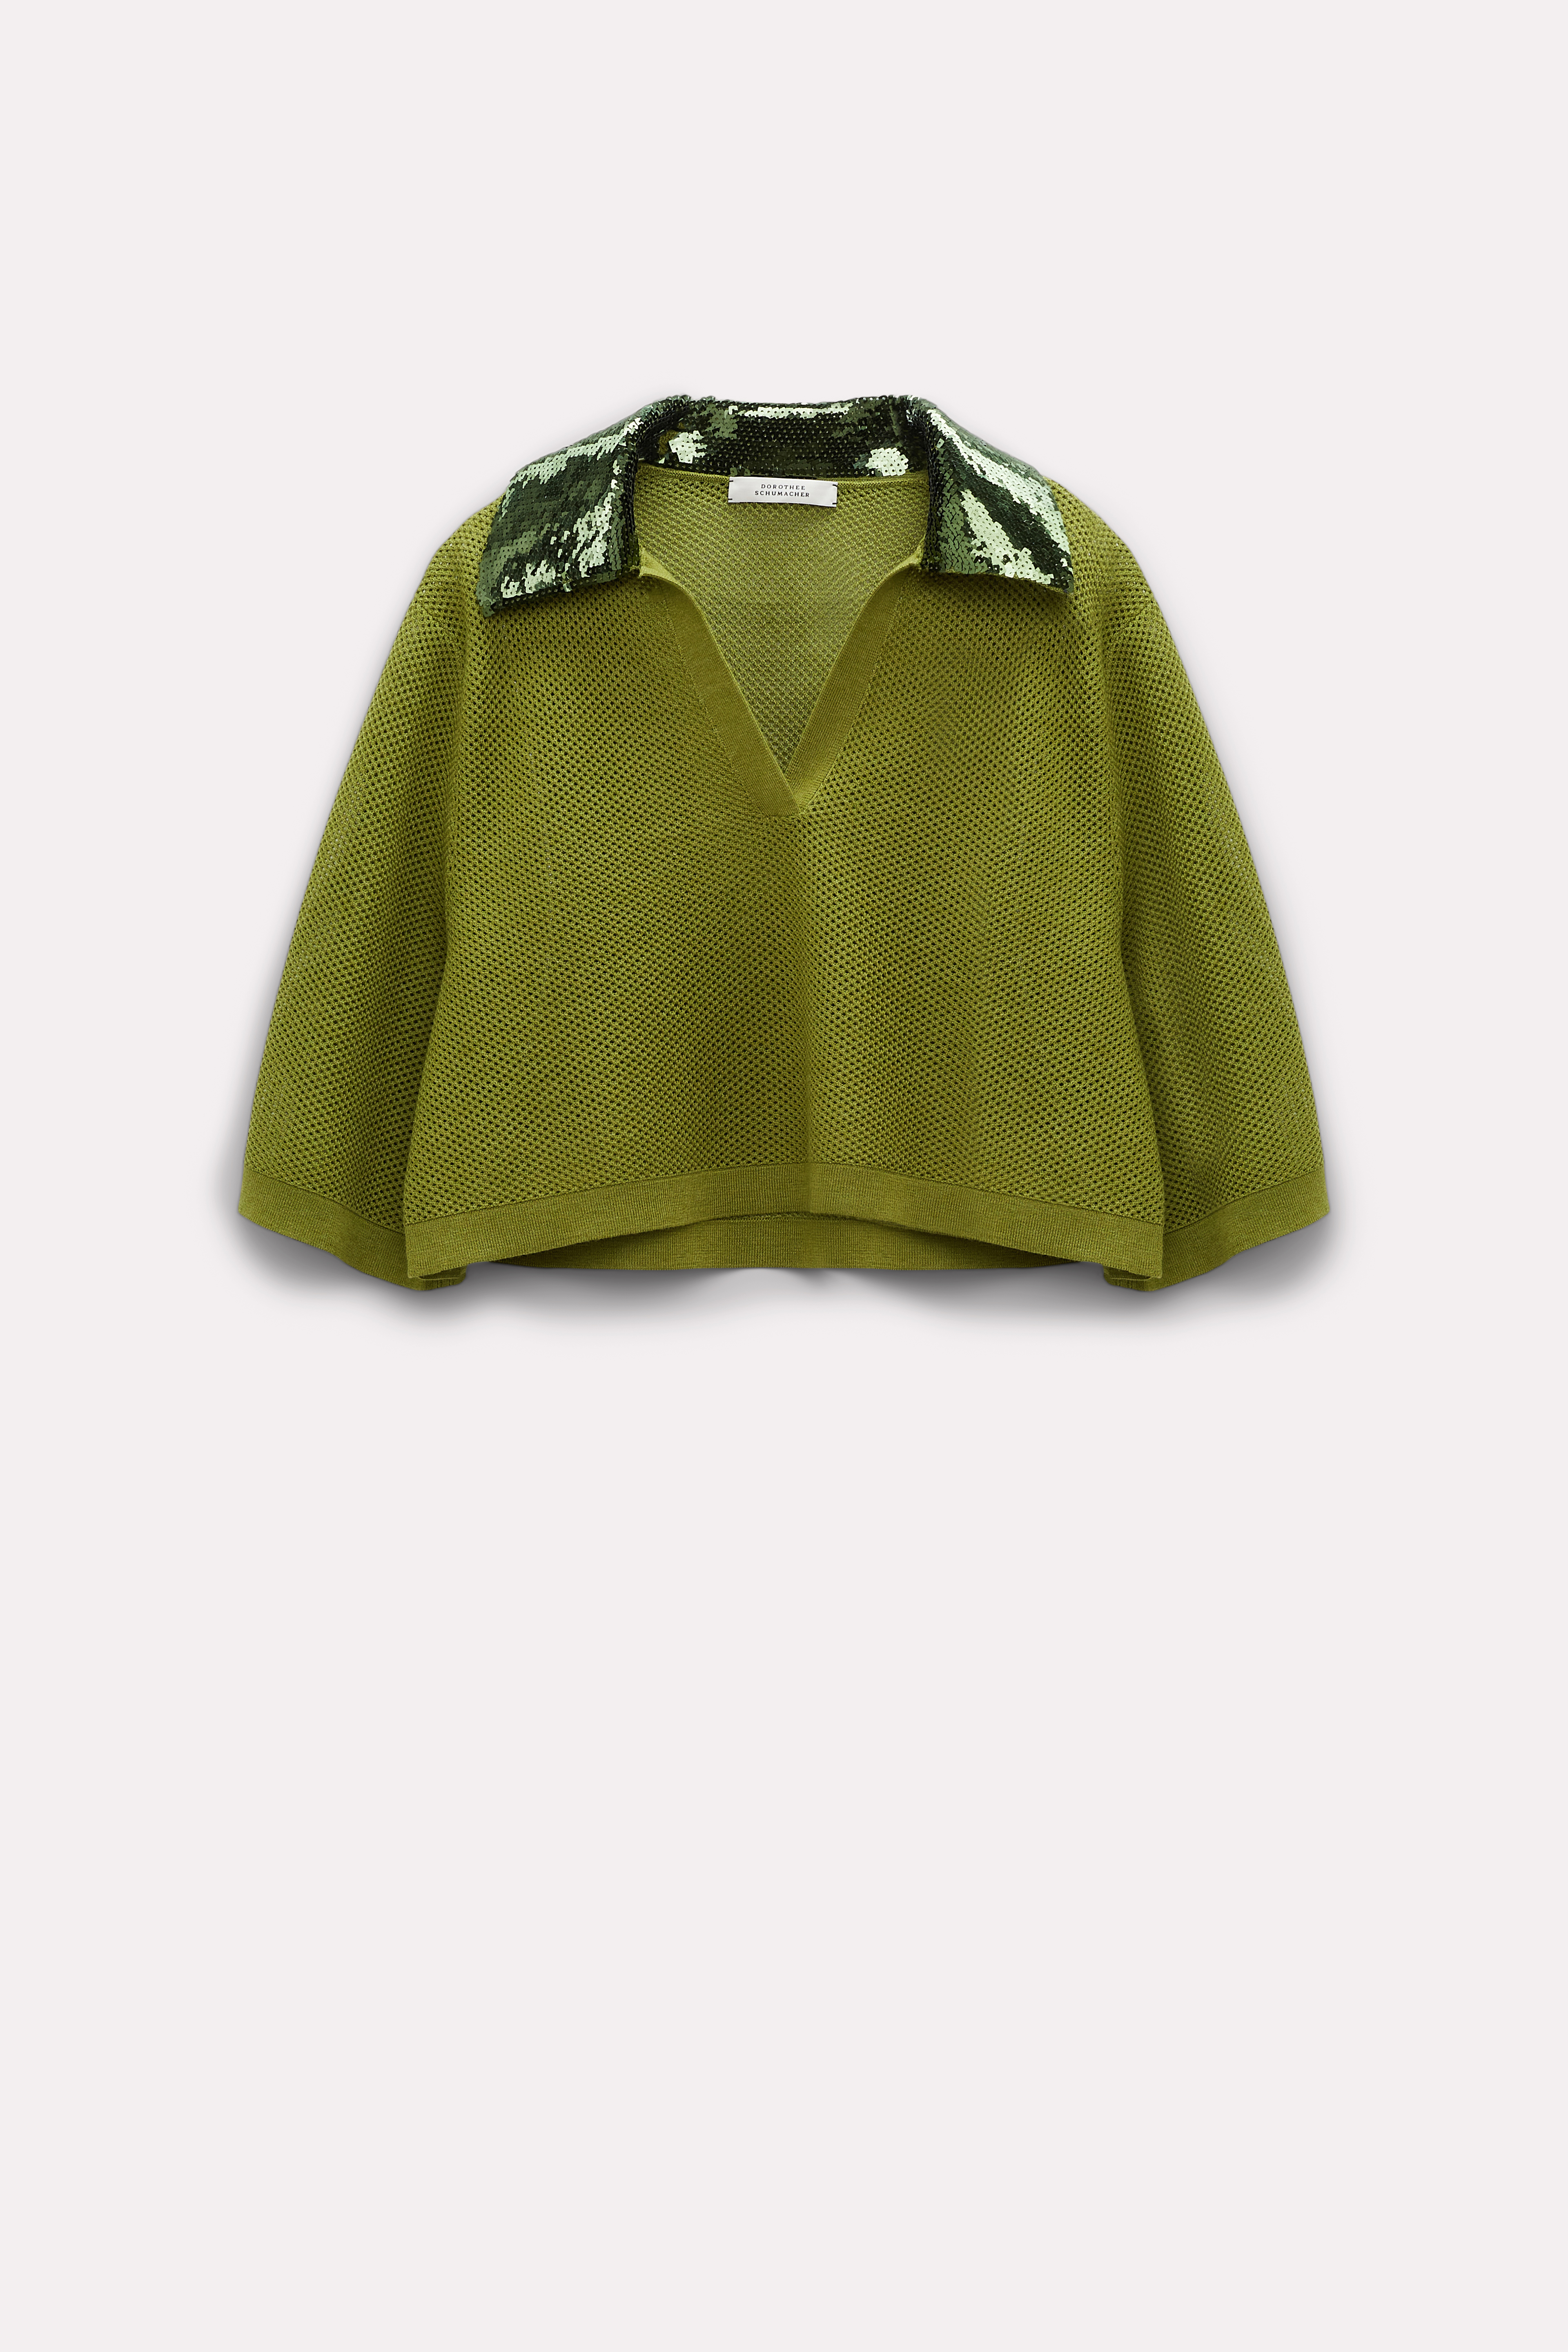 DOROTHEE SCHUMACHER POINTELLE KNIT TOP WITH SEQUIN COLLAR